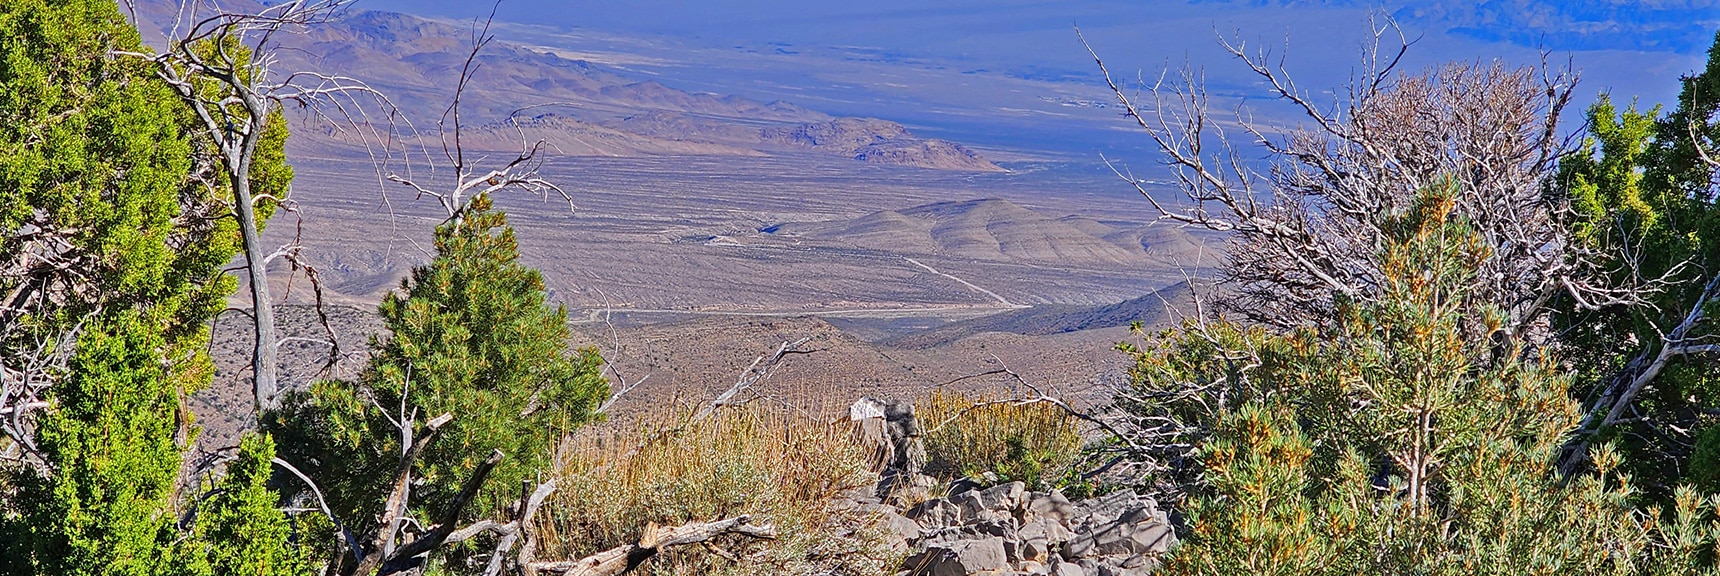 Straight Stretch of Road Far Below is Where Car is Parked | Kyle Canyon Grand Crossing | Northern Half | La Madre Mountains Wilderness, Nevada